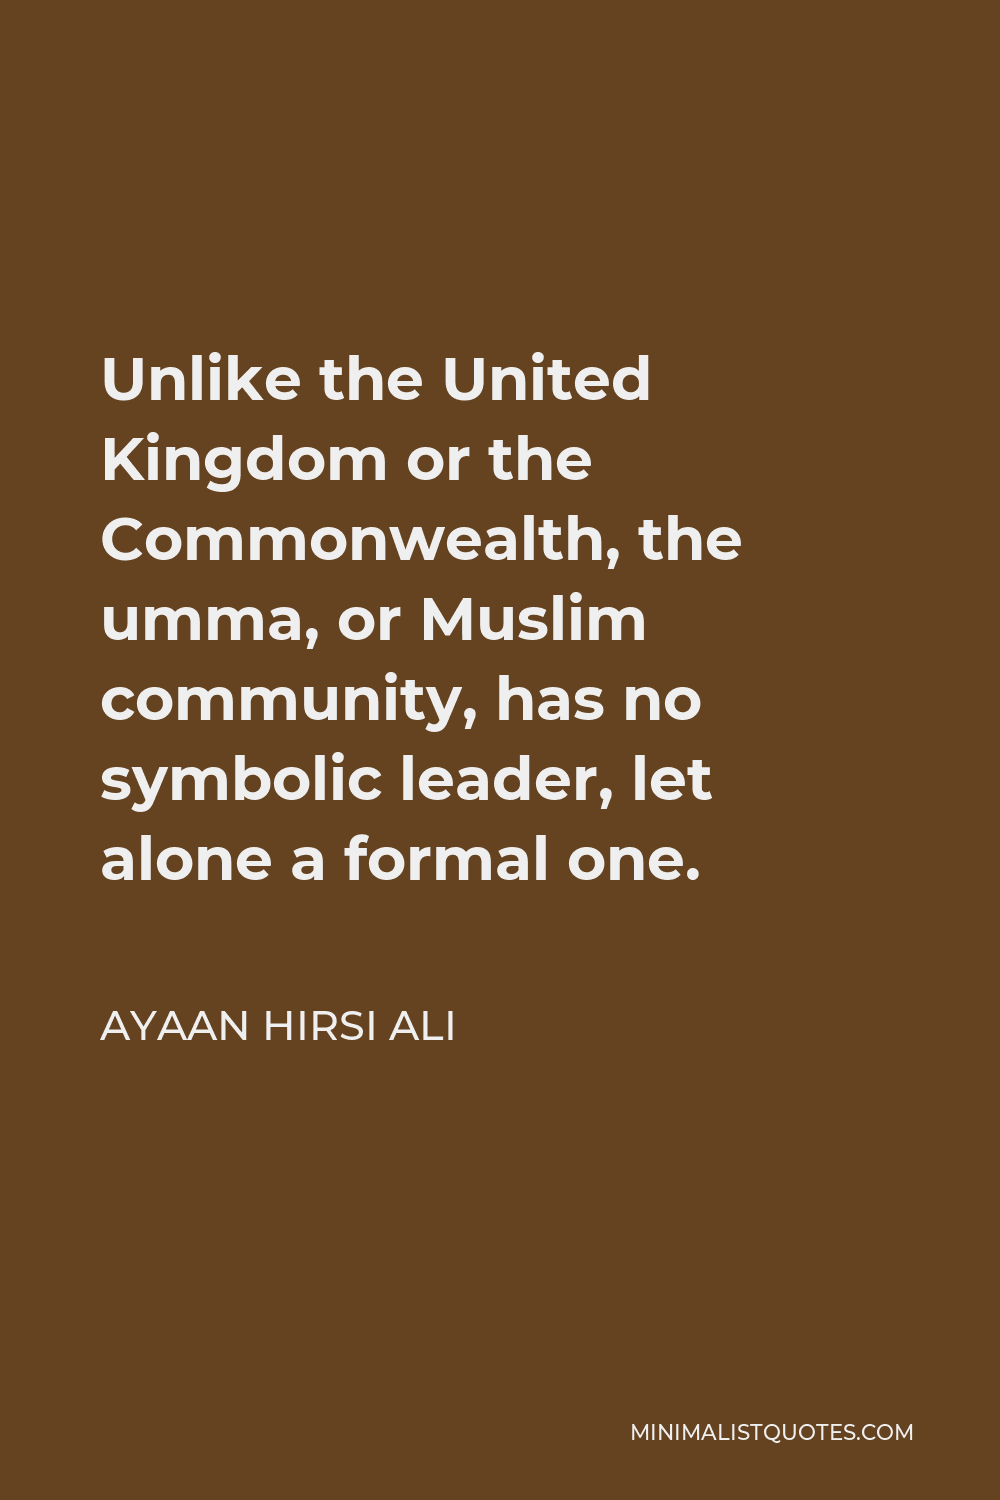 Ayaan Hirsi Ali Quote - Unlike the United Kingdom or the Commonwealth, the umma, or Muslim community, has no symbolic leader, let alone a formal one.